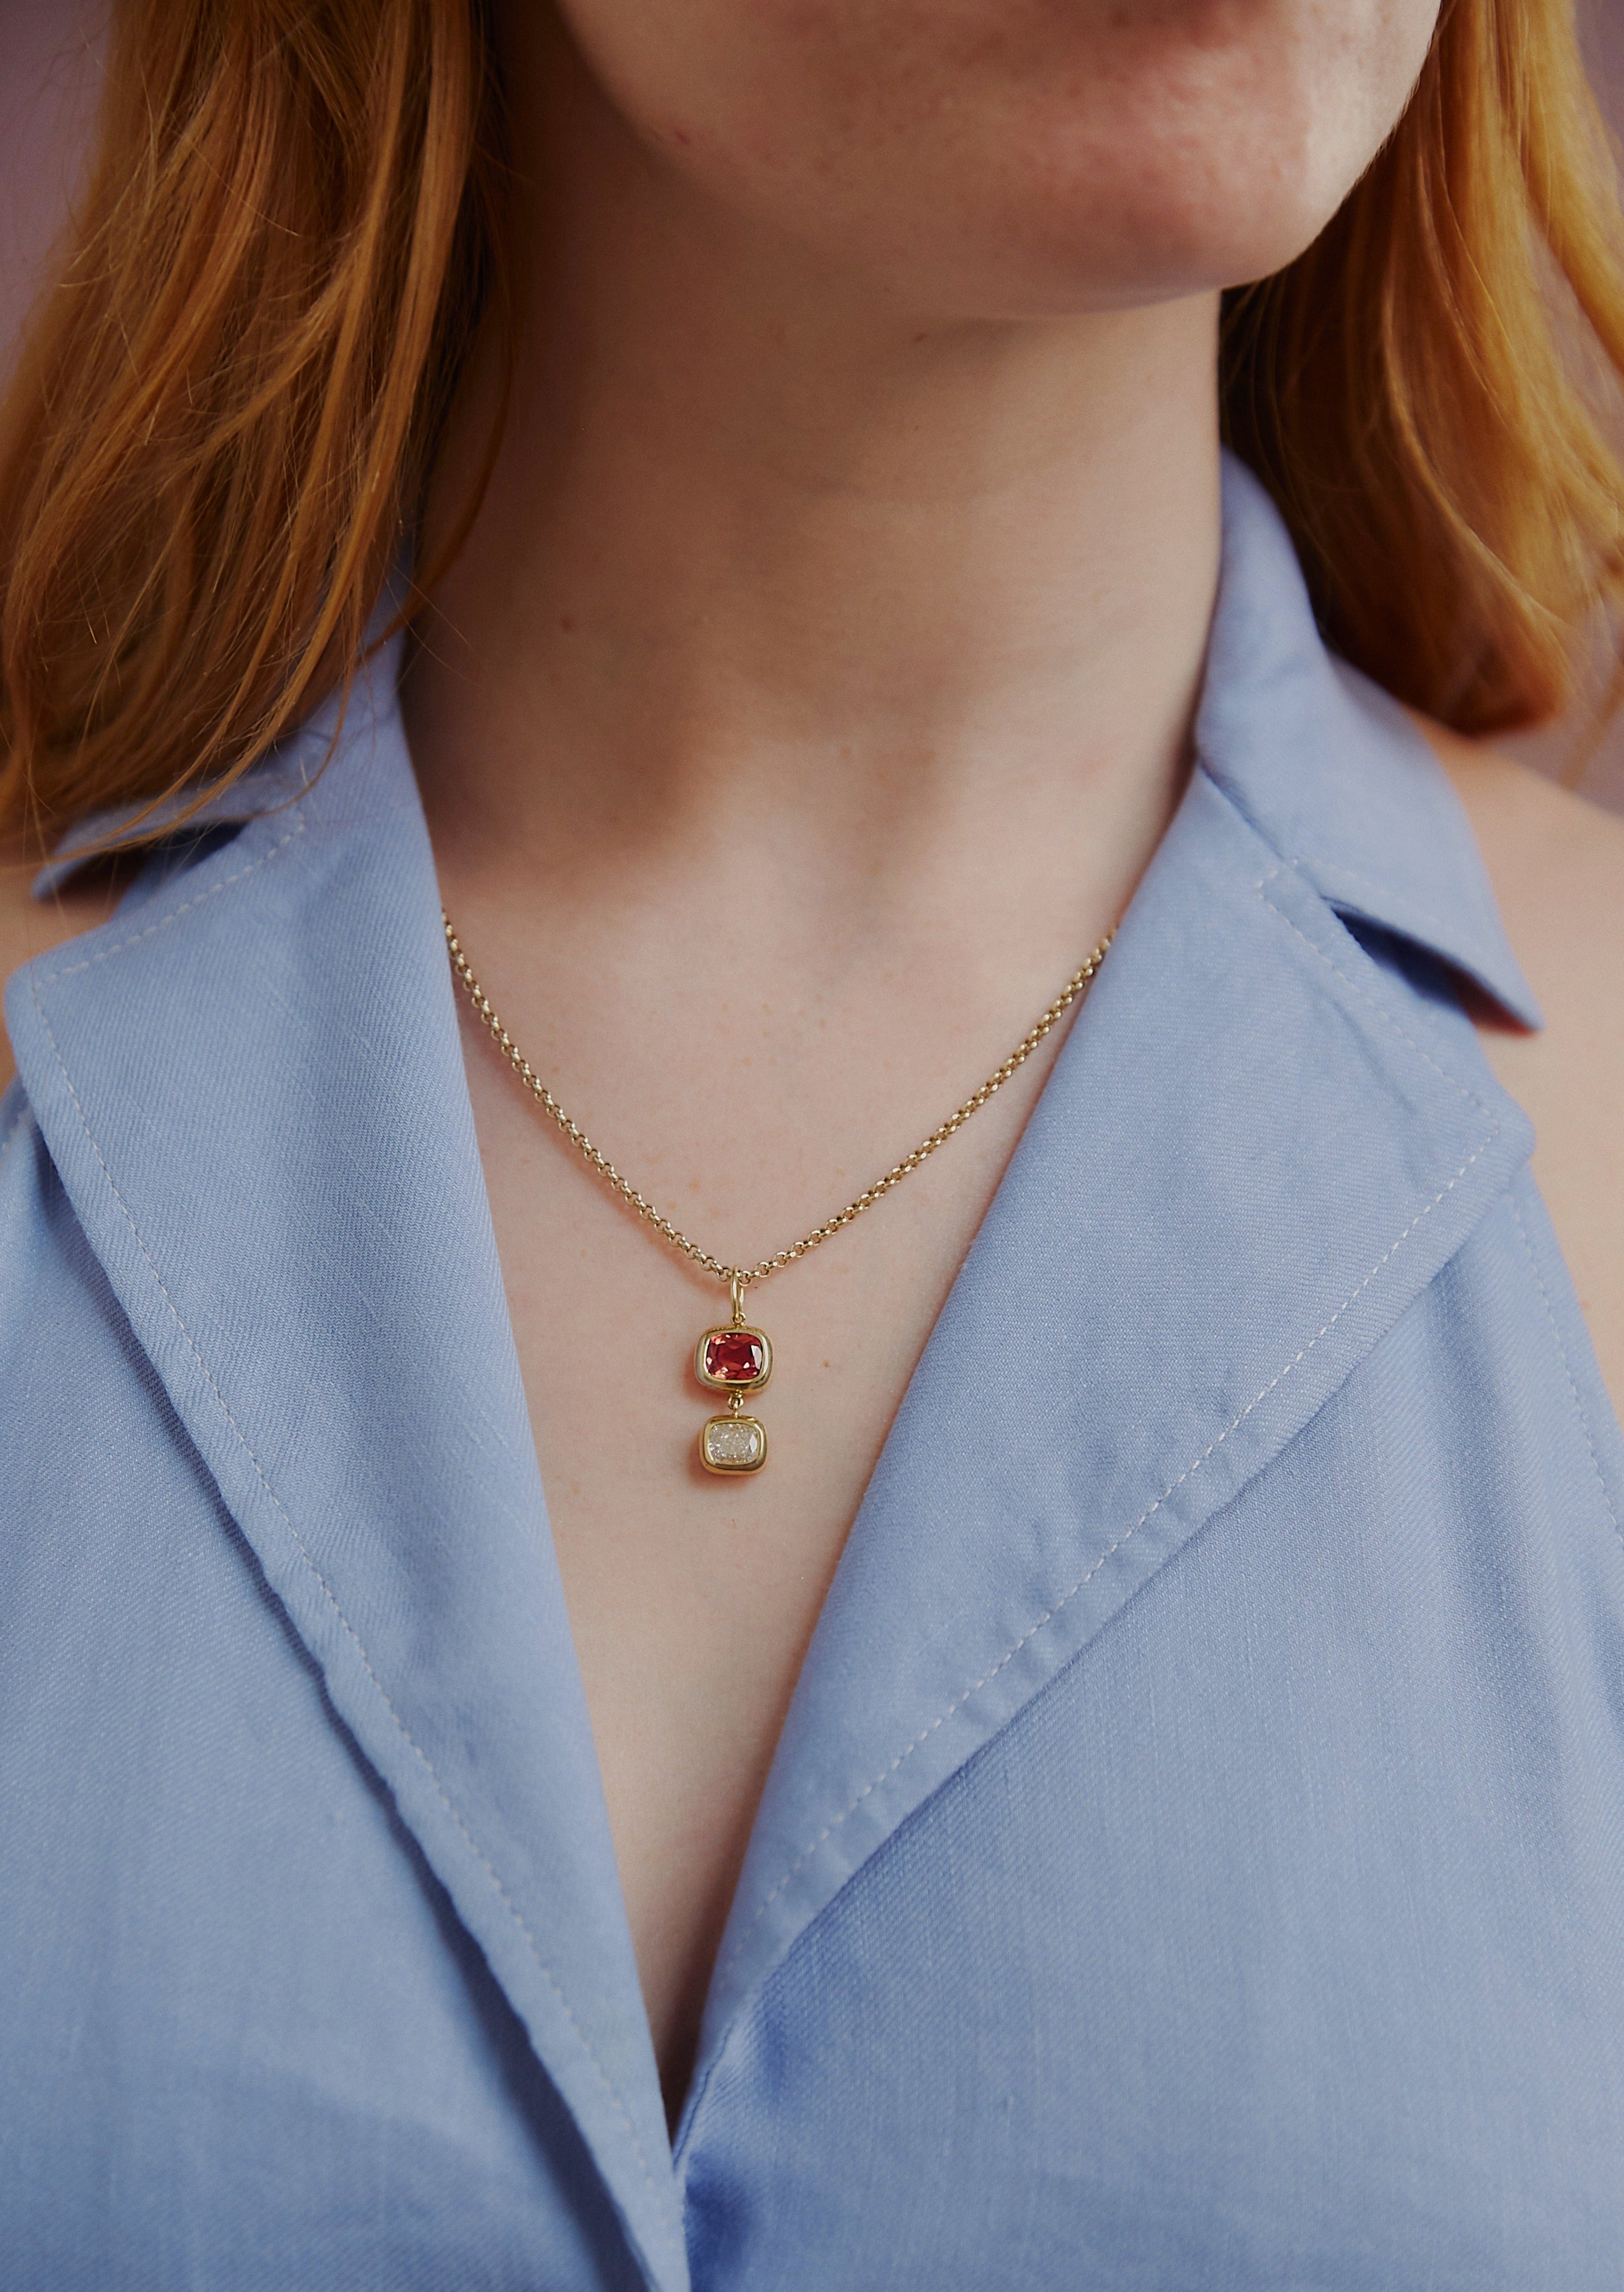 Red Spinel and Diamond pendant. Red Spinel and Diamond necklace. Natural red gemstone. Natural diamond necklace. Gemstone pendant. Gemstone necklace. 18 carat gold jewellery. Serena Ansell Jewellery. Fine jewellery London.